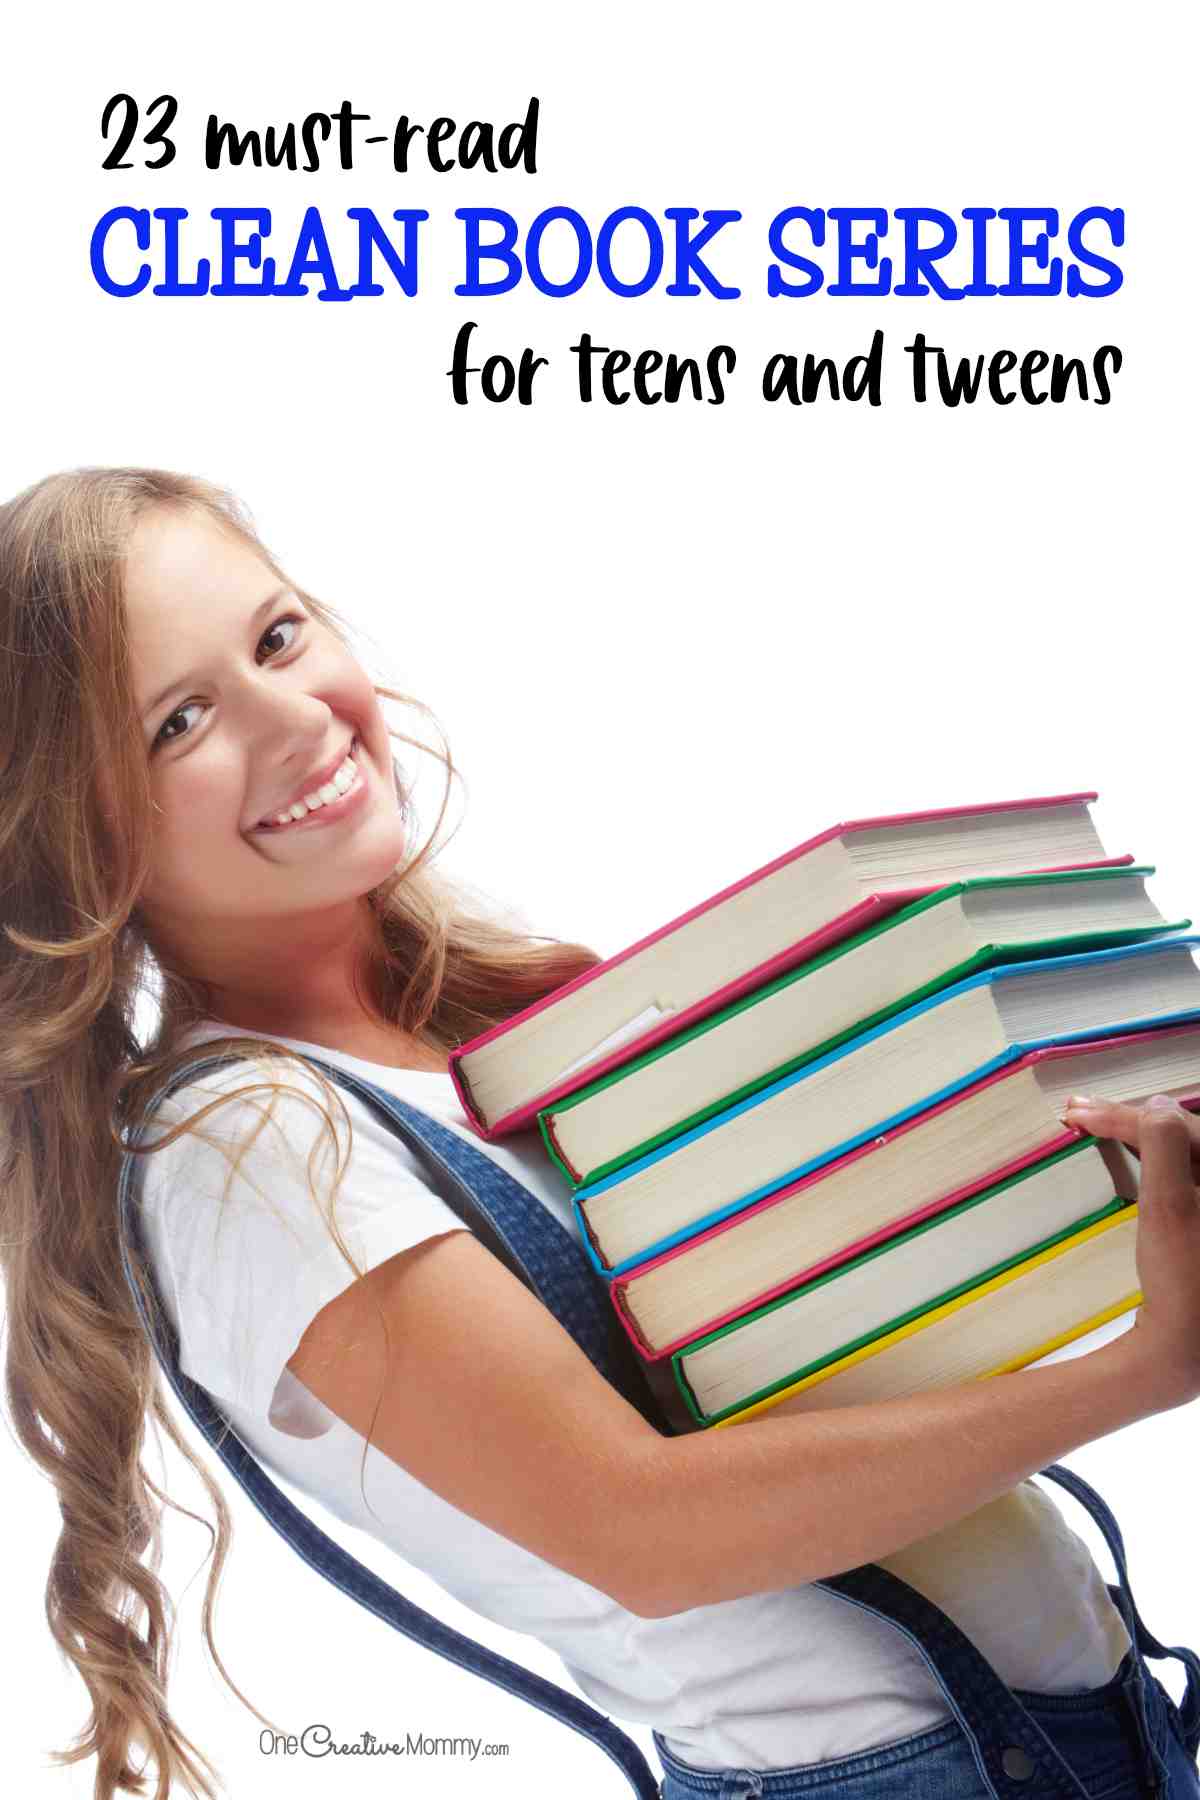 Image of a teenage girl holding a stack of books